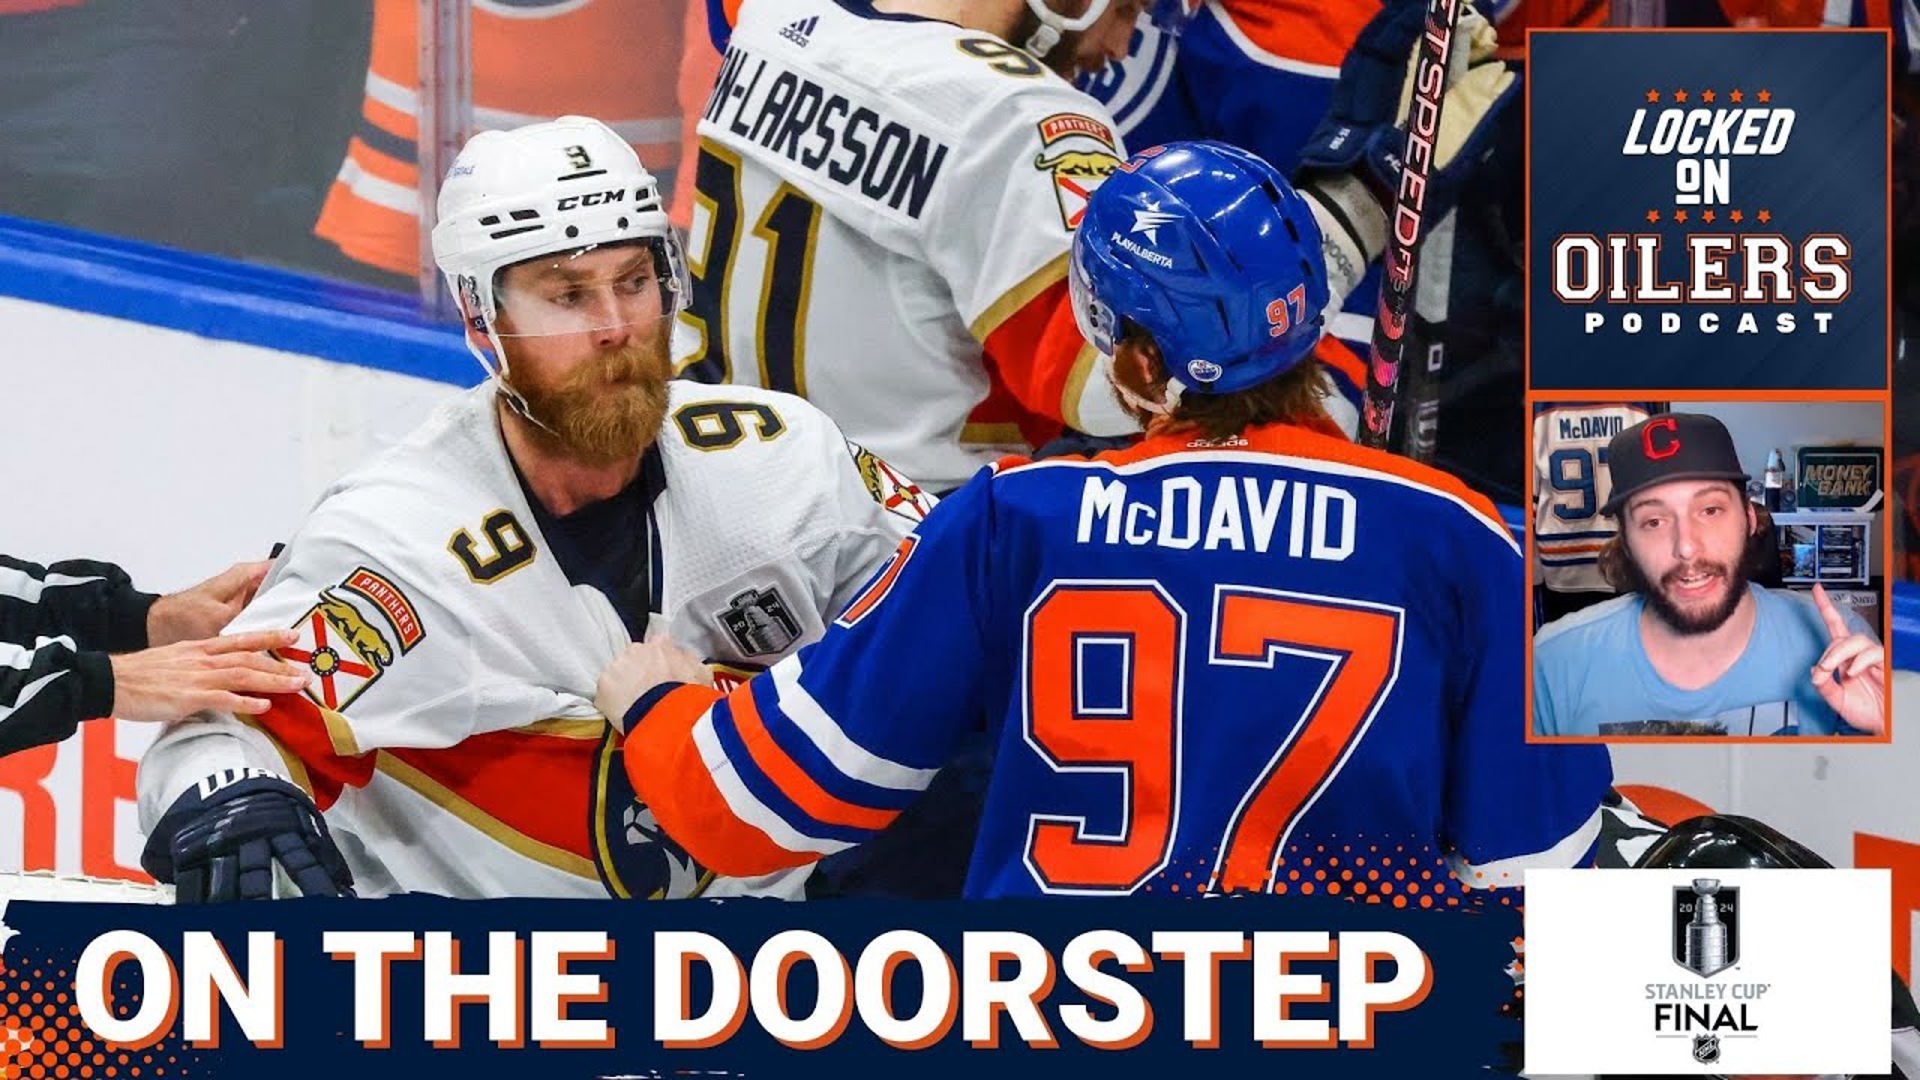 Join host Nick Zararis on this episode of Locked on Oilers where he dives into just how incredible Edmonton Oilers' captain Connor McDavid's postseason has been.